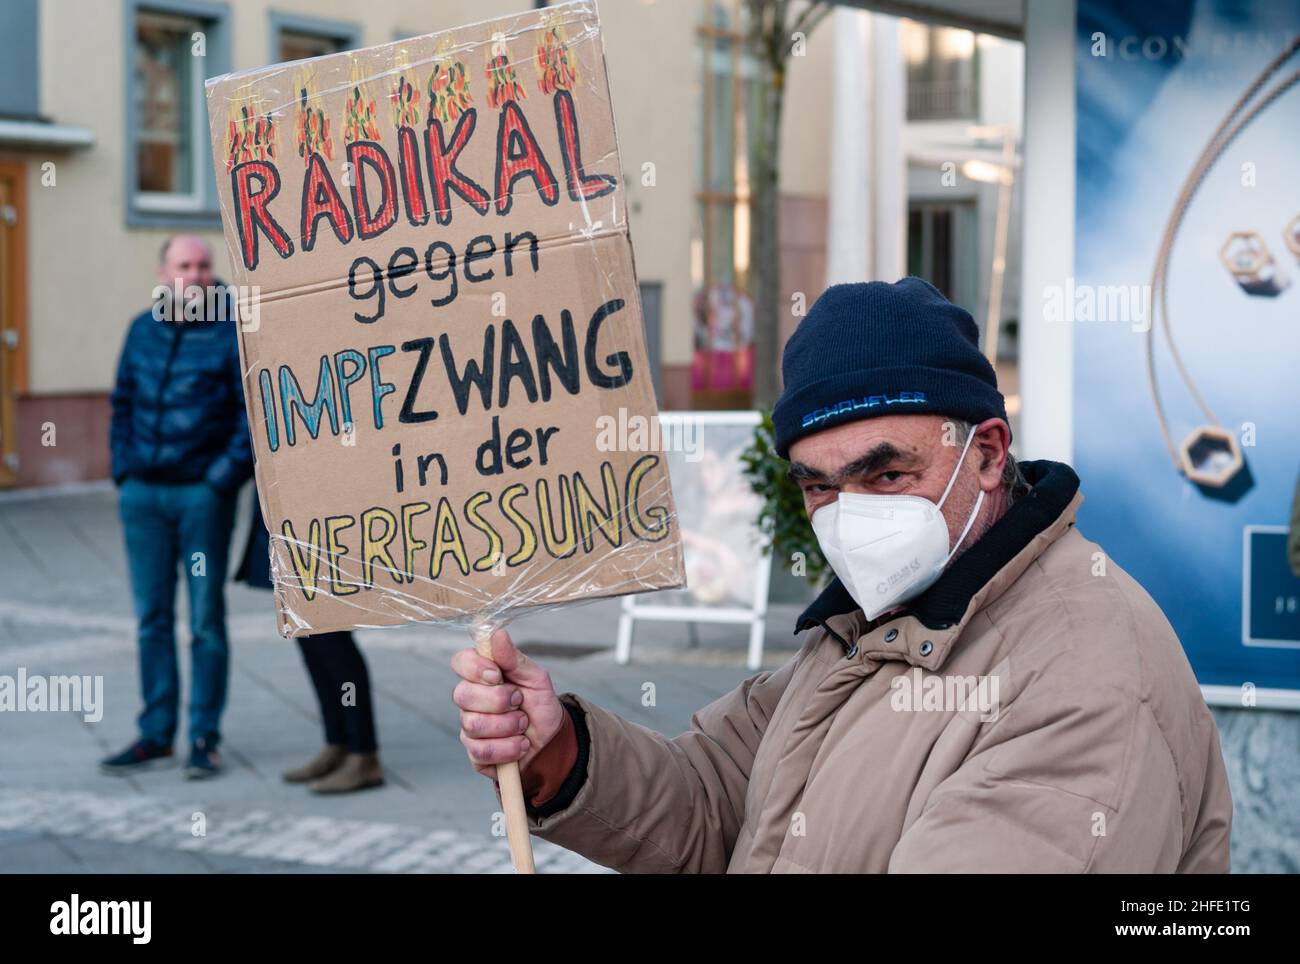 Amstetten, Austria - January 15 2022: Protester Holding Sign at Demonstration or Protest of MFG Menschen Freiheit Grundrechte Party against Mandatory Stock Photo